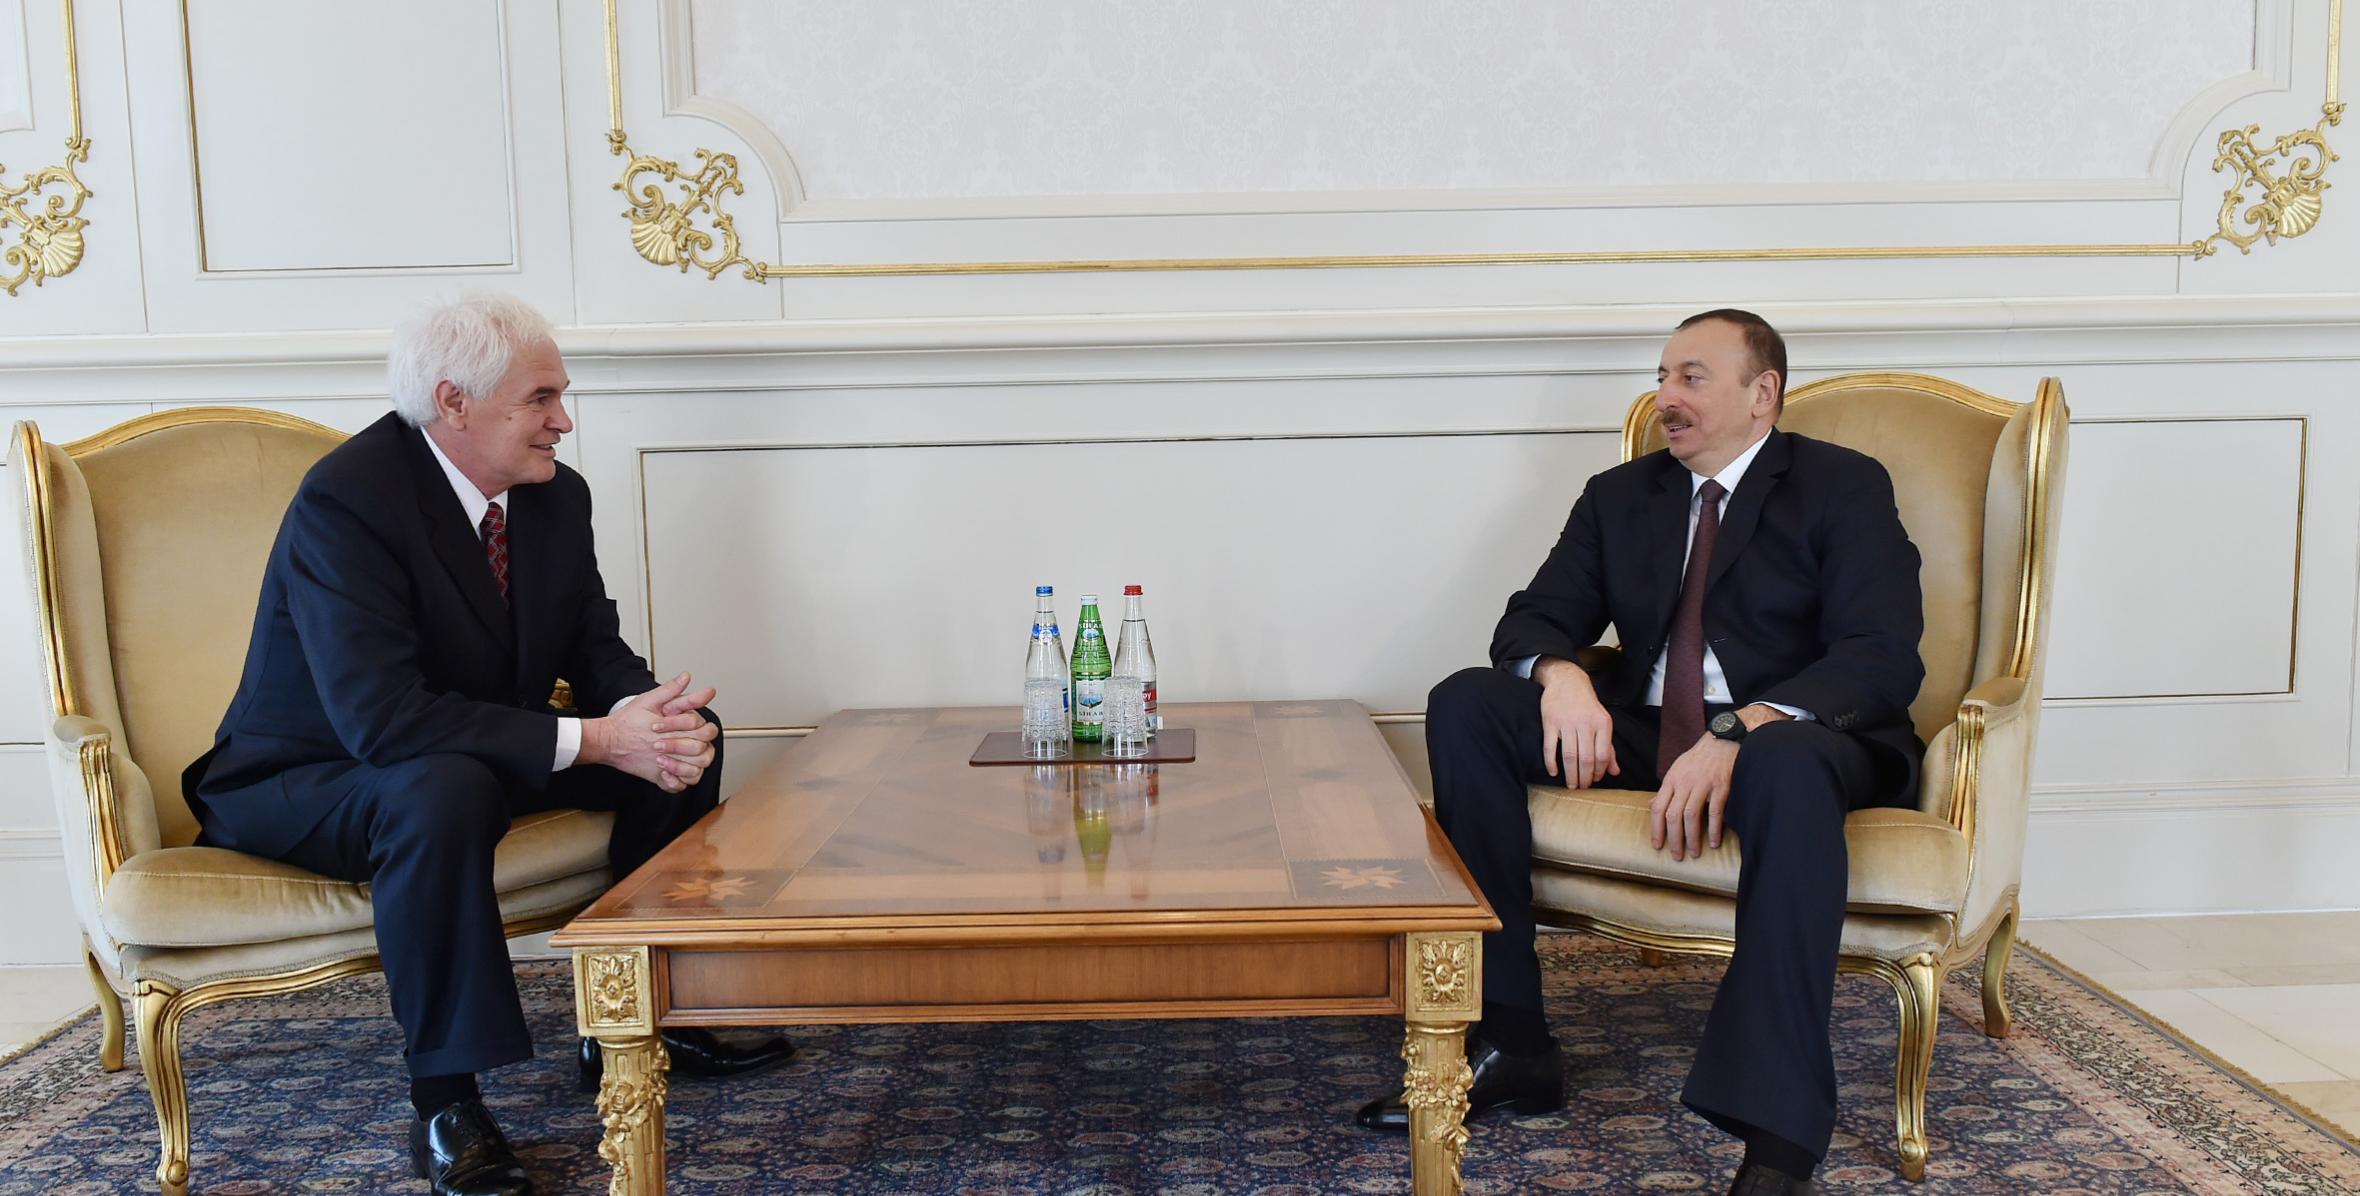 Ilham Aliyev received the credentials of the newly-appointed Ambassador of Montenegro